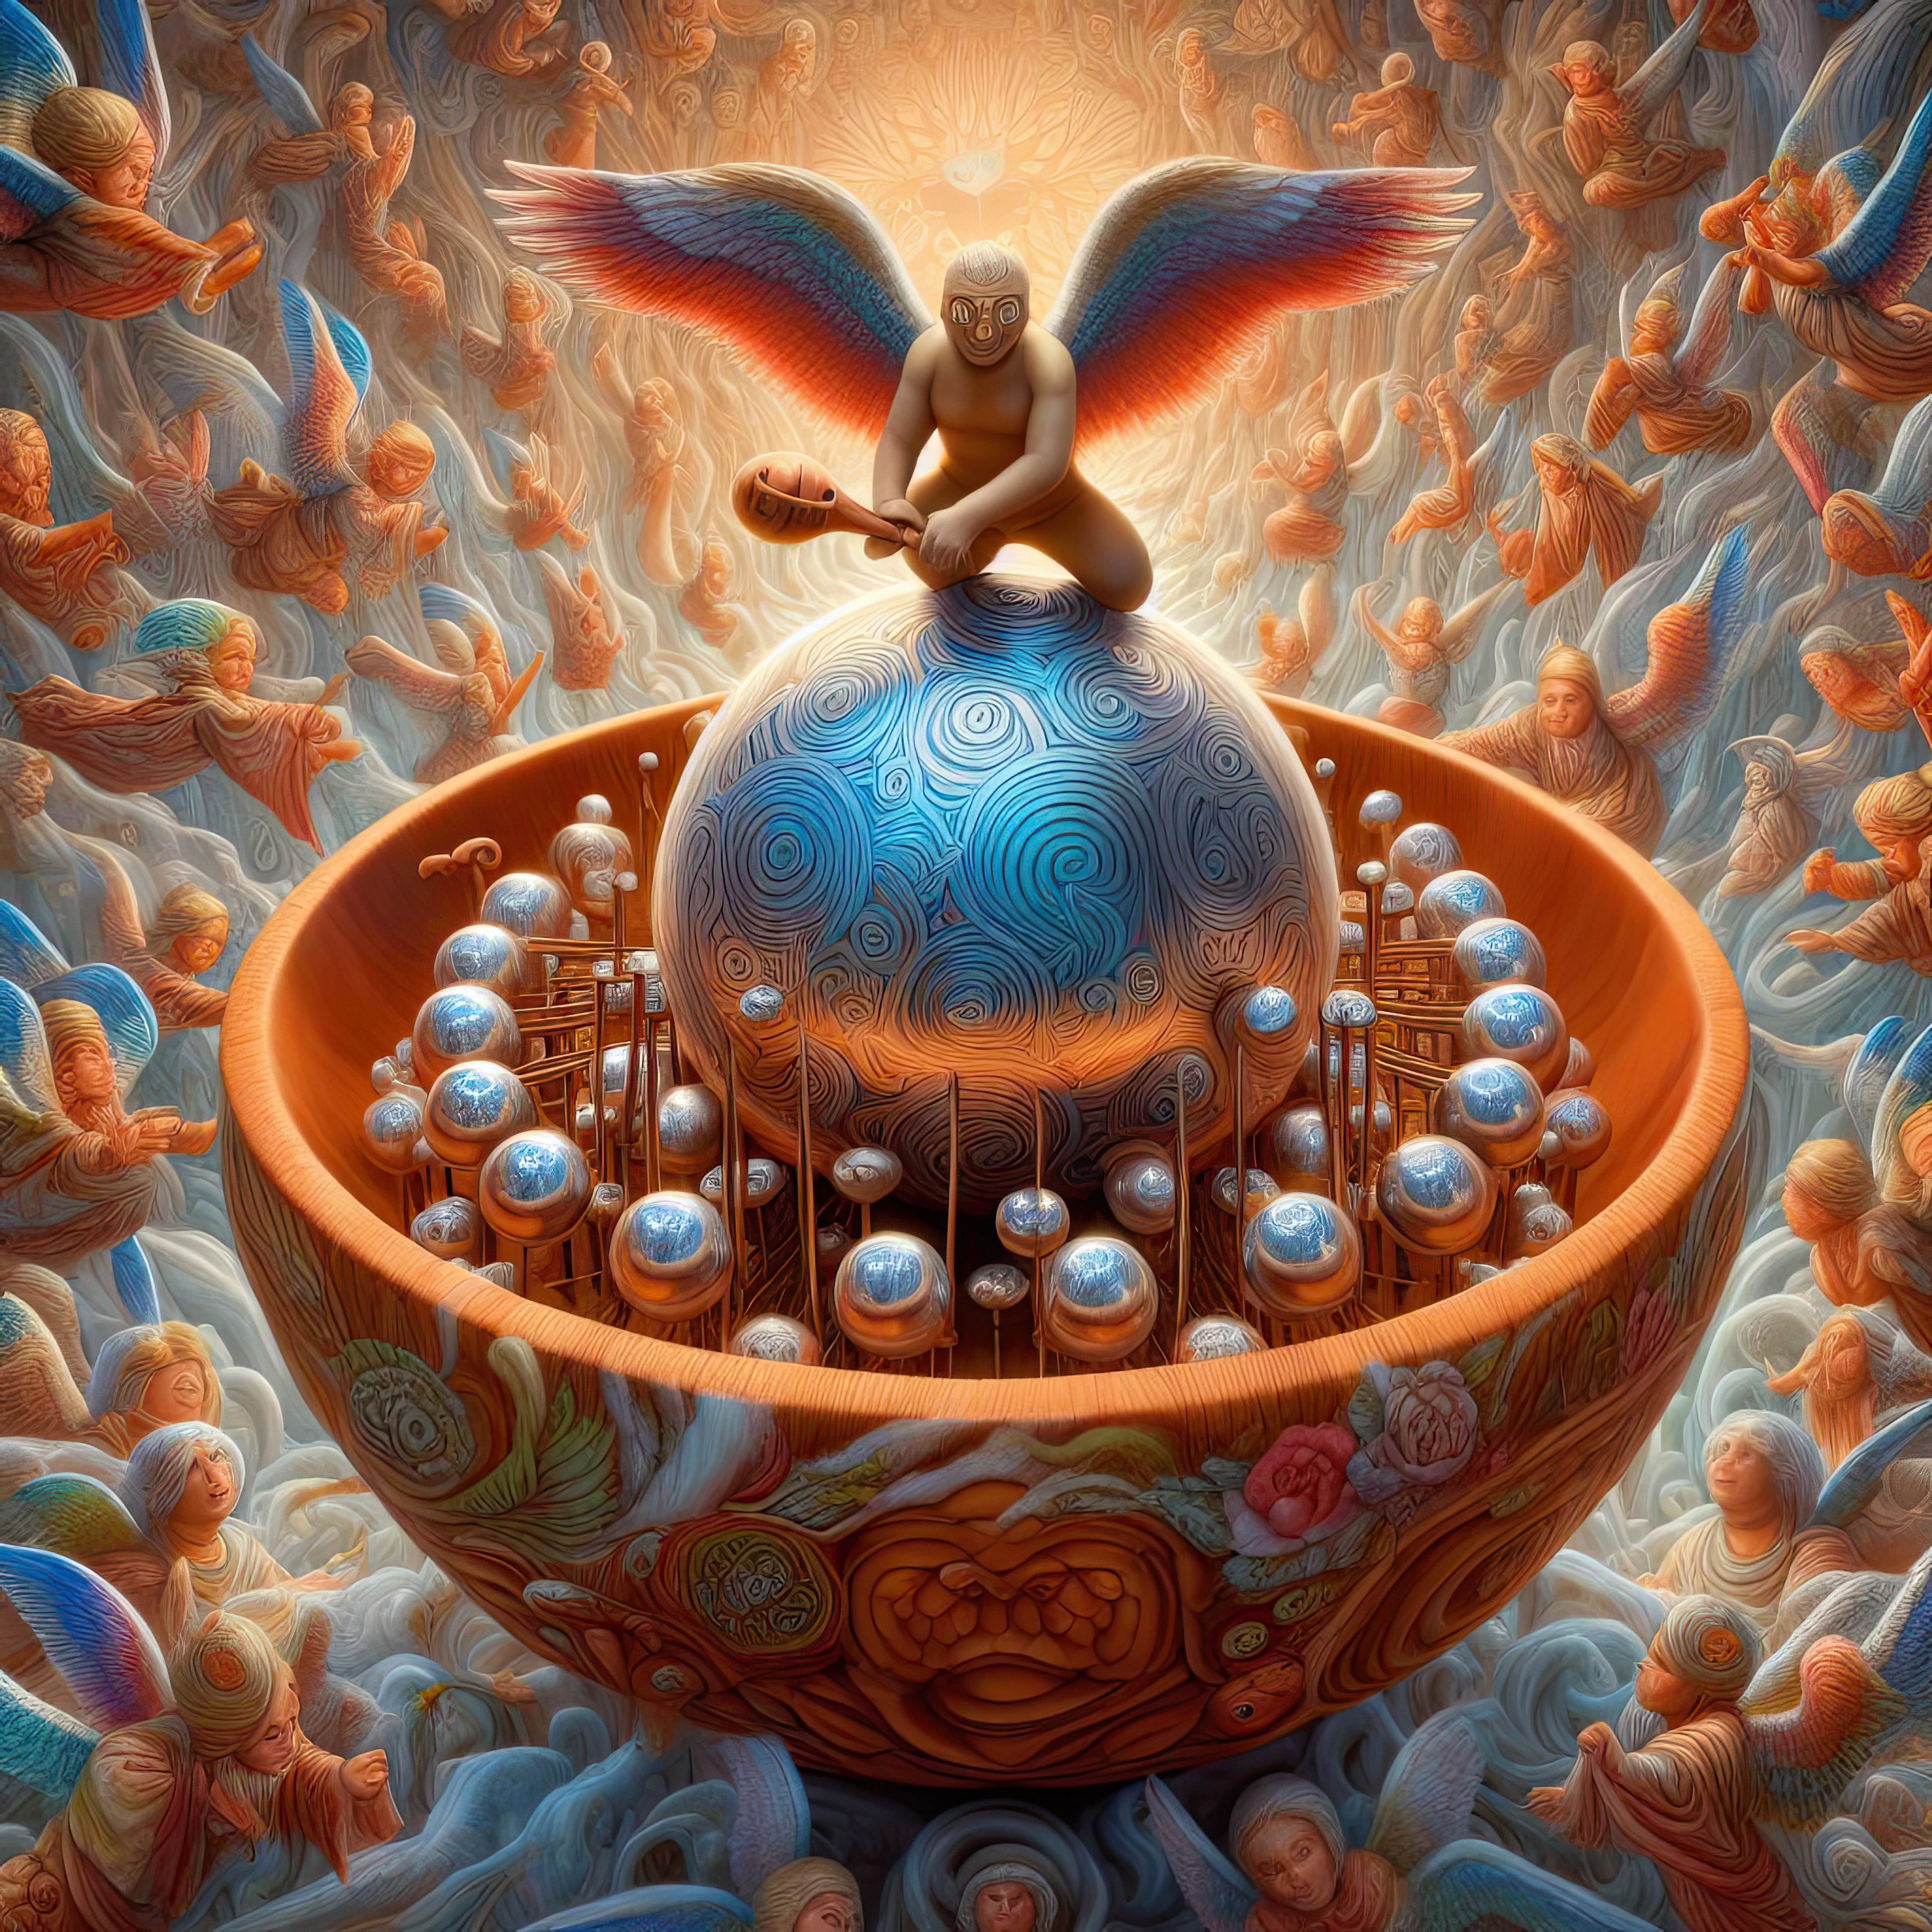 A Chiming Boading Ball in a Nearly Hemispherical Wooden Salad Bowl with Psychedelic Angels All Over the Place